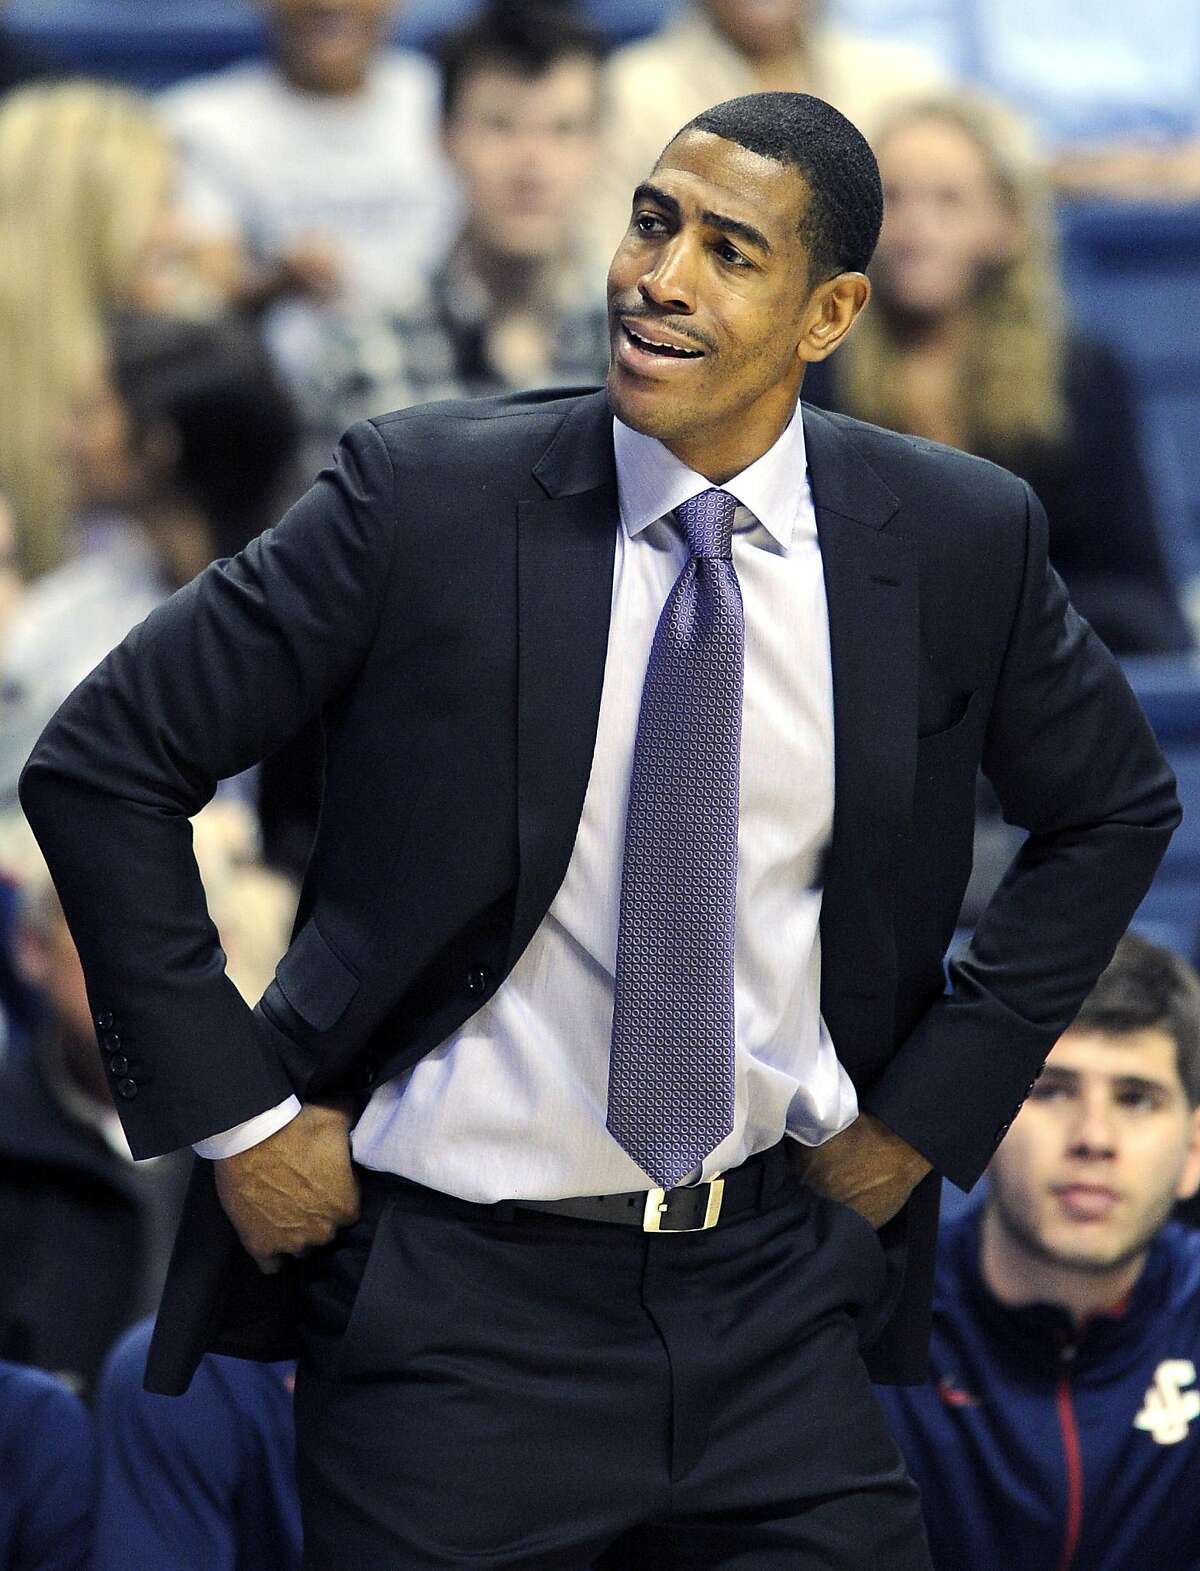 Connecticut coach Kevin Ollie reacts to a call during the second half of his team's 57-49 victory over Harvard in an NCAA college basketball game in Storrs, Conn., Friday, Dec. 7, 2012. (AP Photo/Fred Beckham)